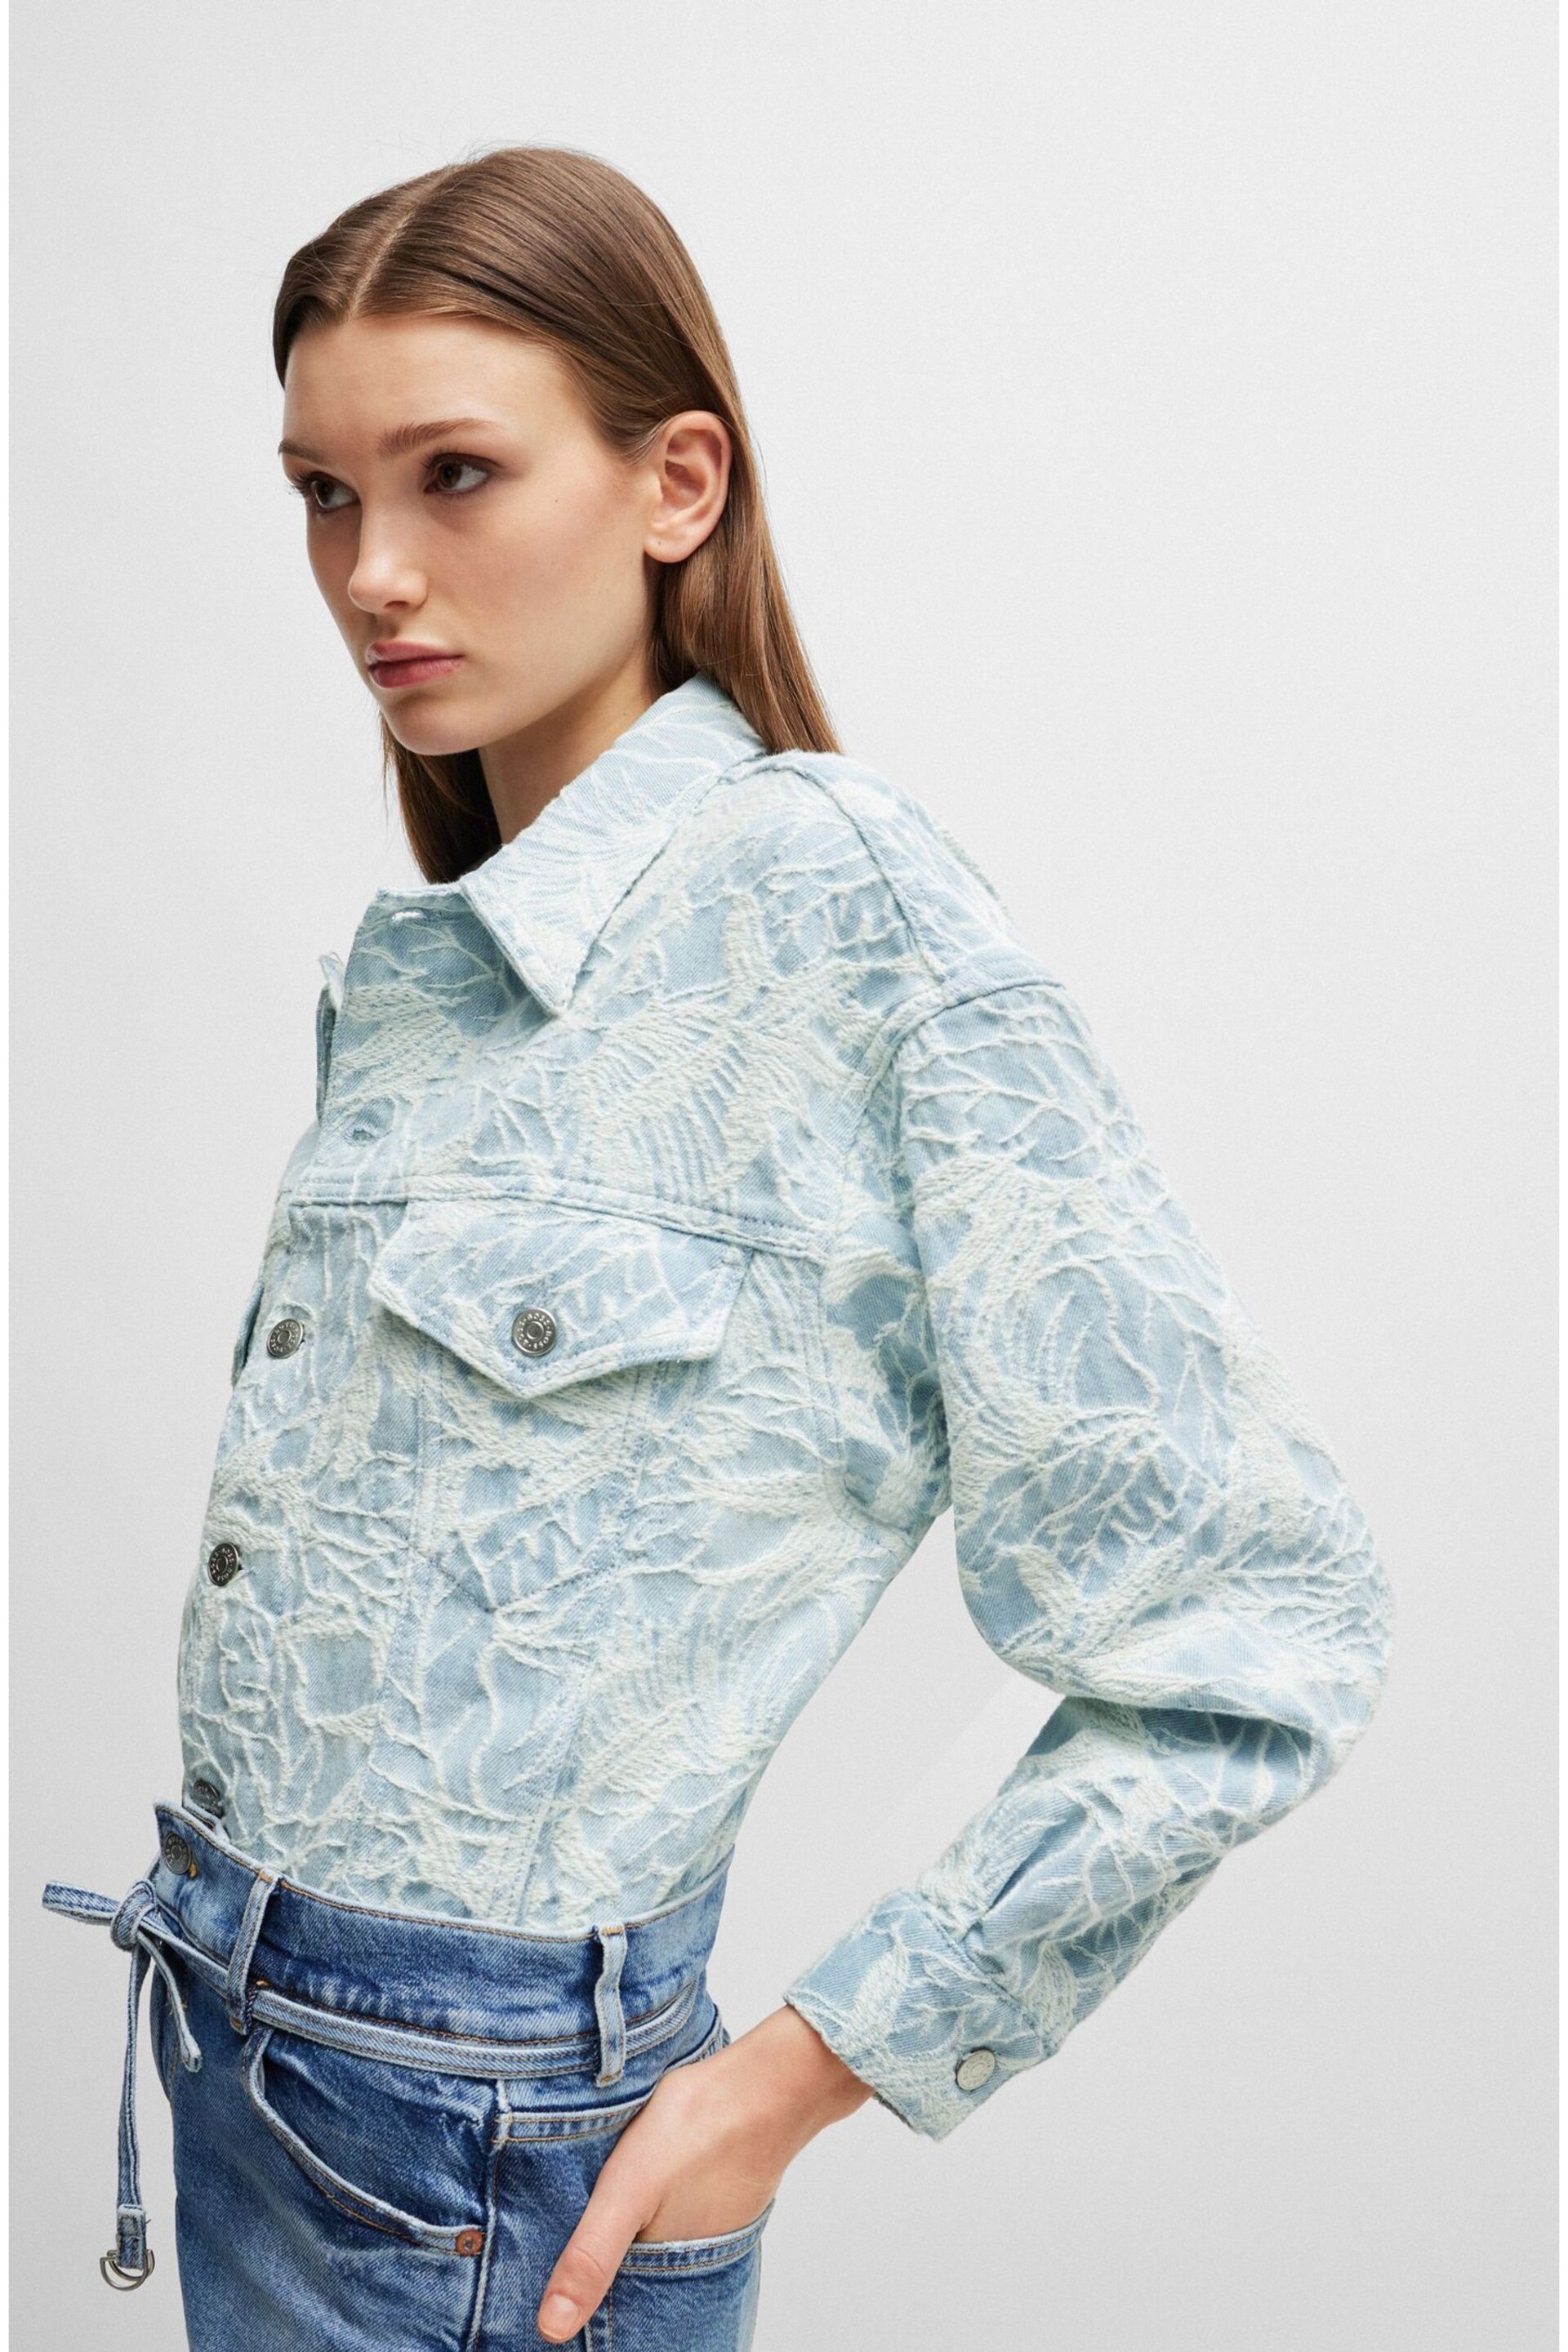 BOSS Blue BOSS Blue Cotton-Denim Jacket With Embroidered Pattern - Image 3 of 6